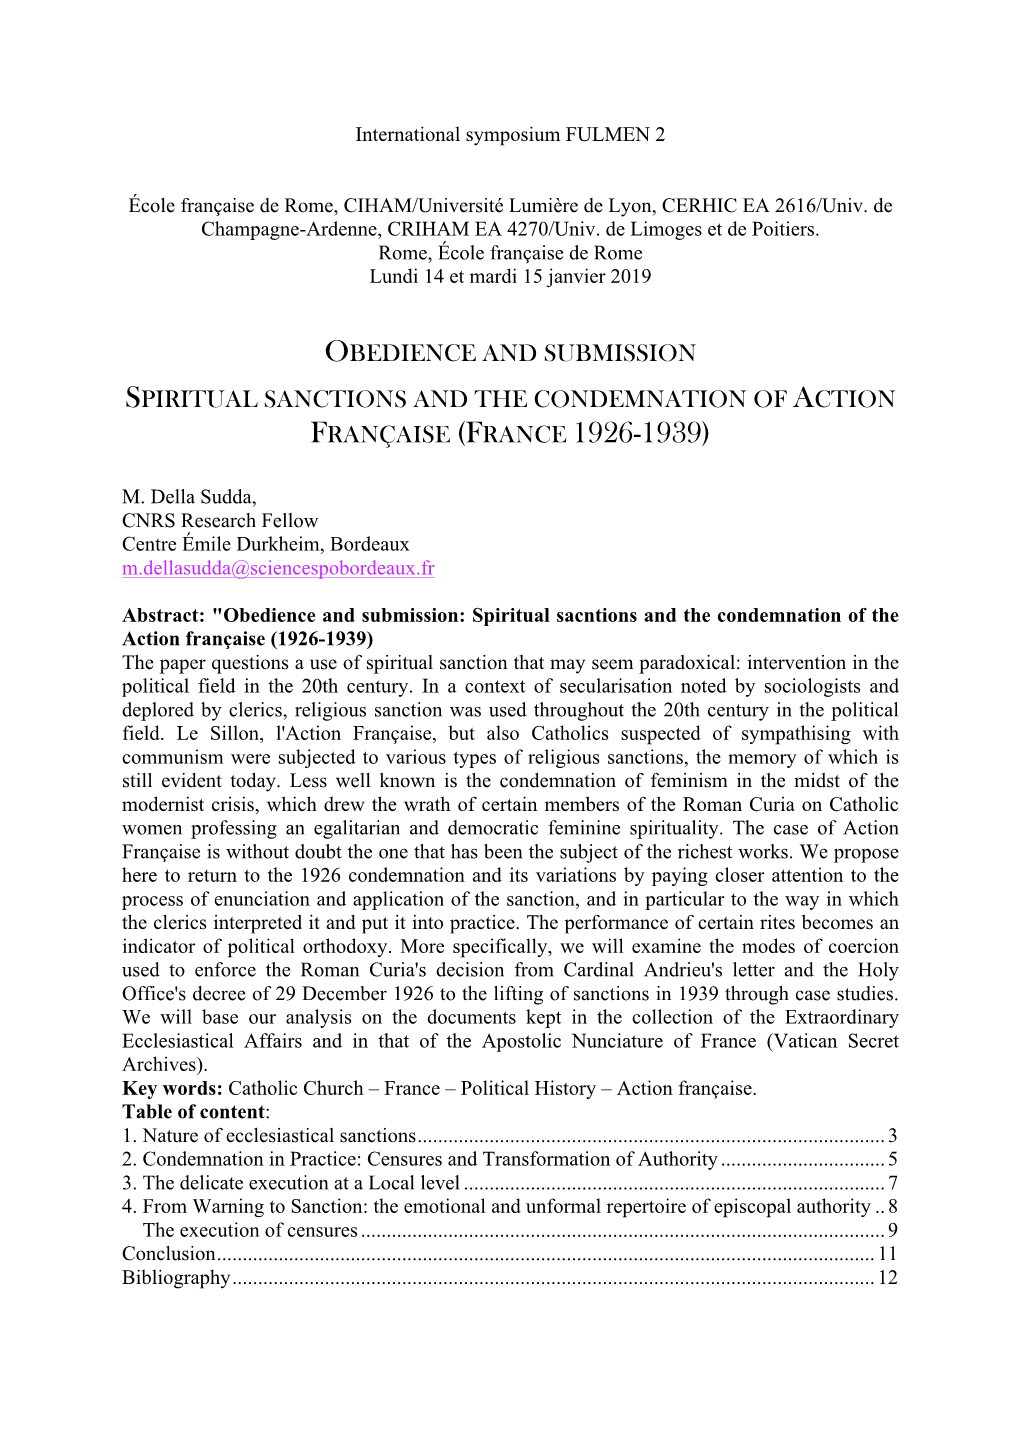 Obedience and Submission Spiritual Sanctions and the Condemnation of Action Française (France 1926-1939)